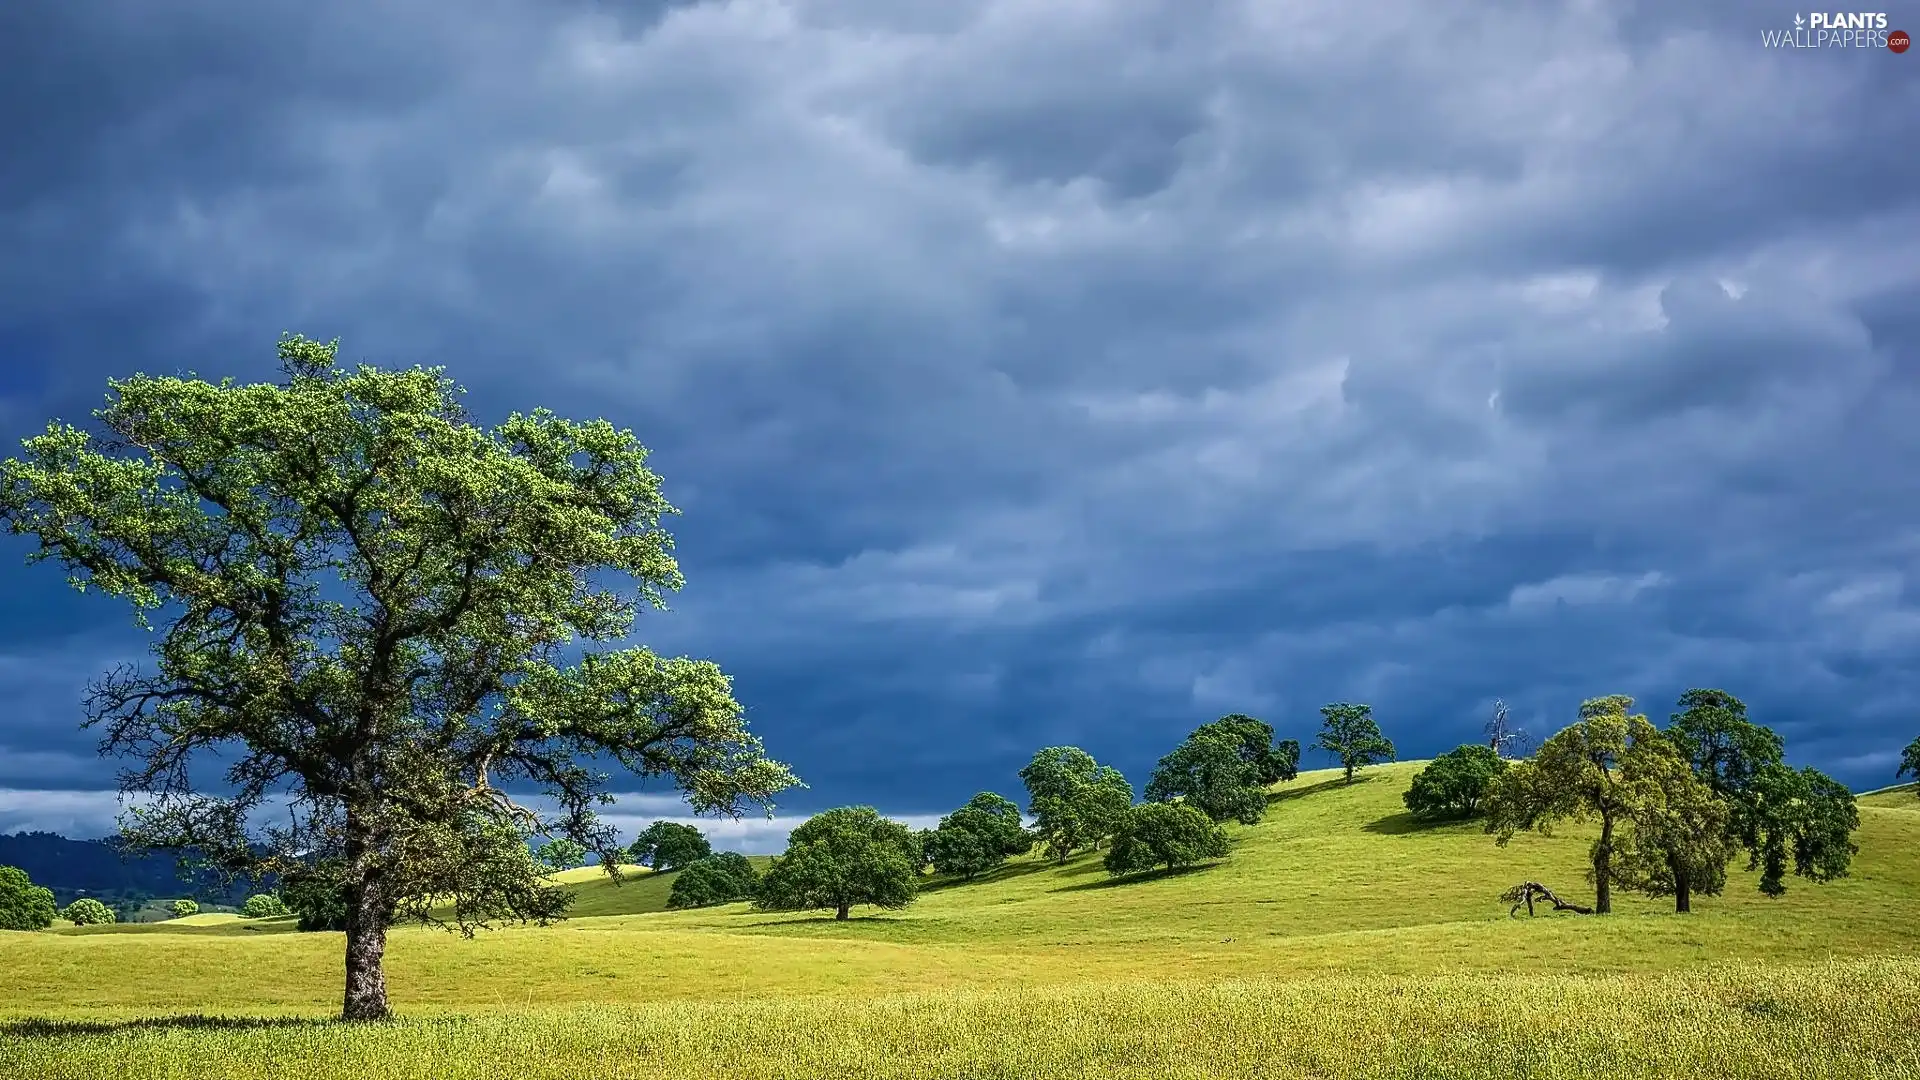 Lowland, viewes, clouds, trees